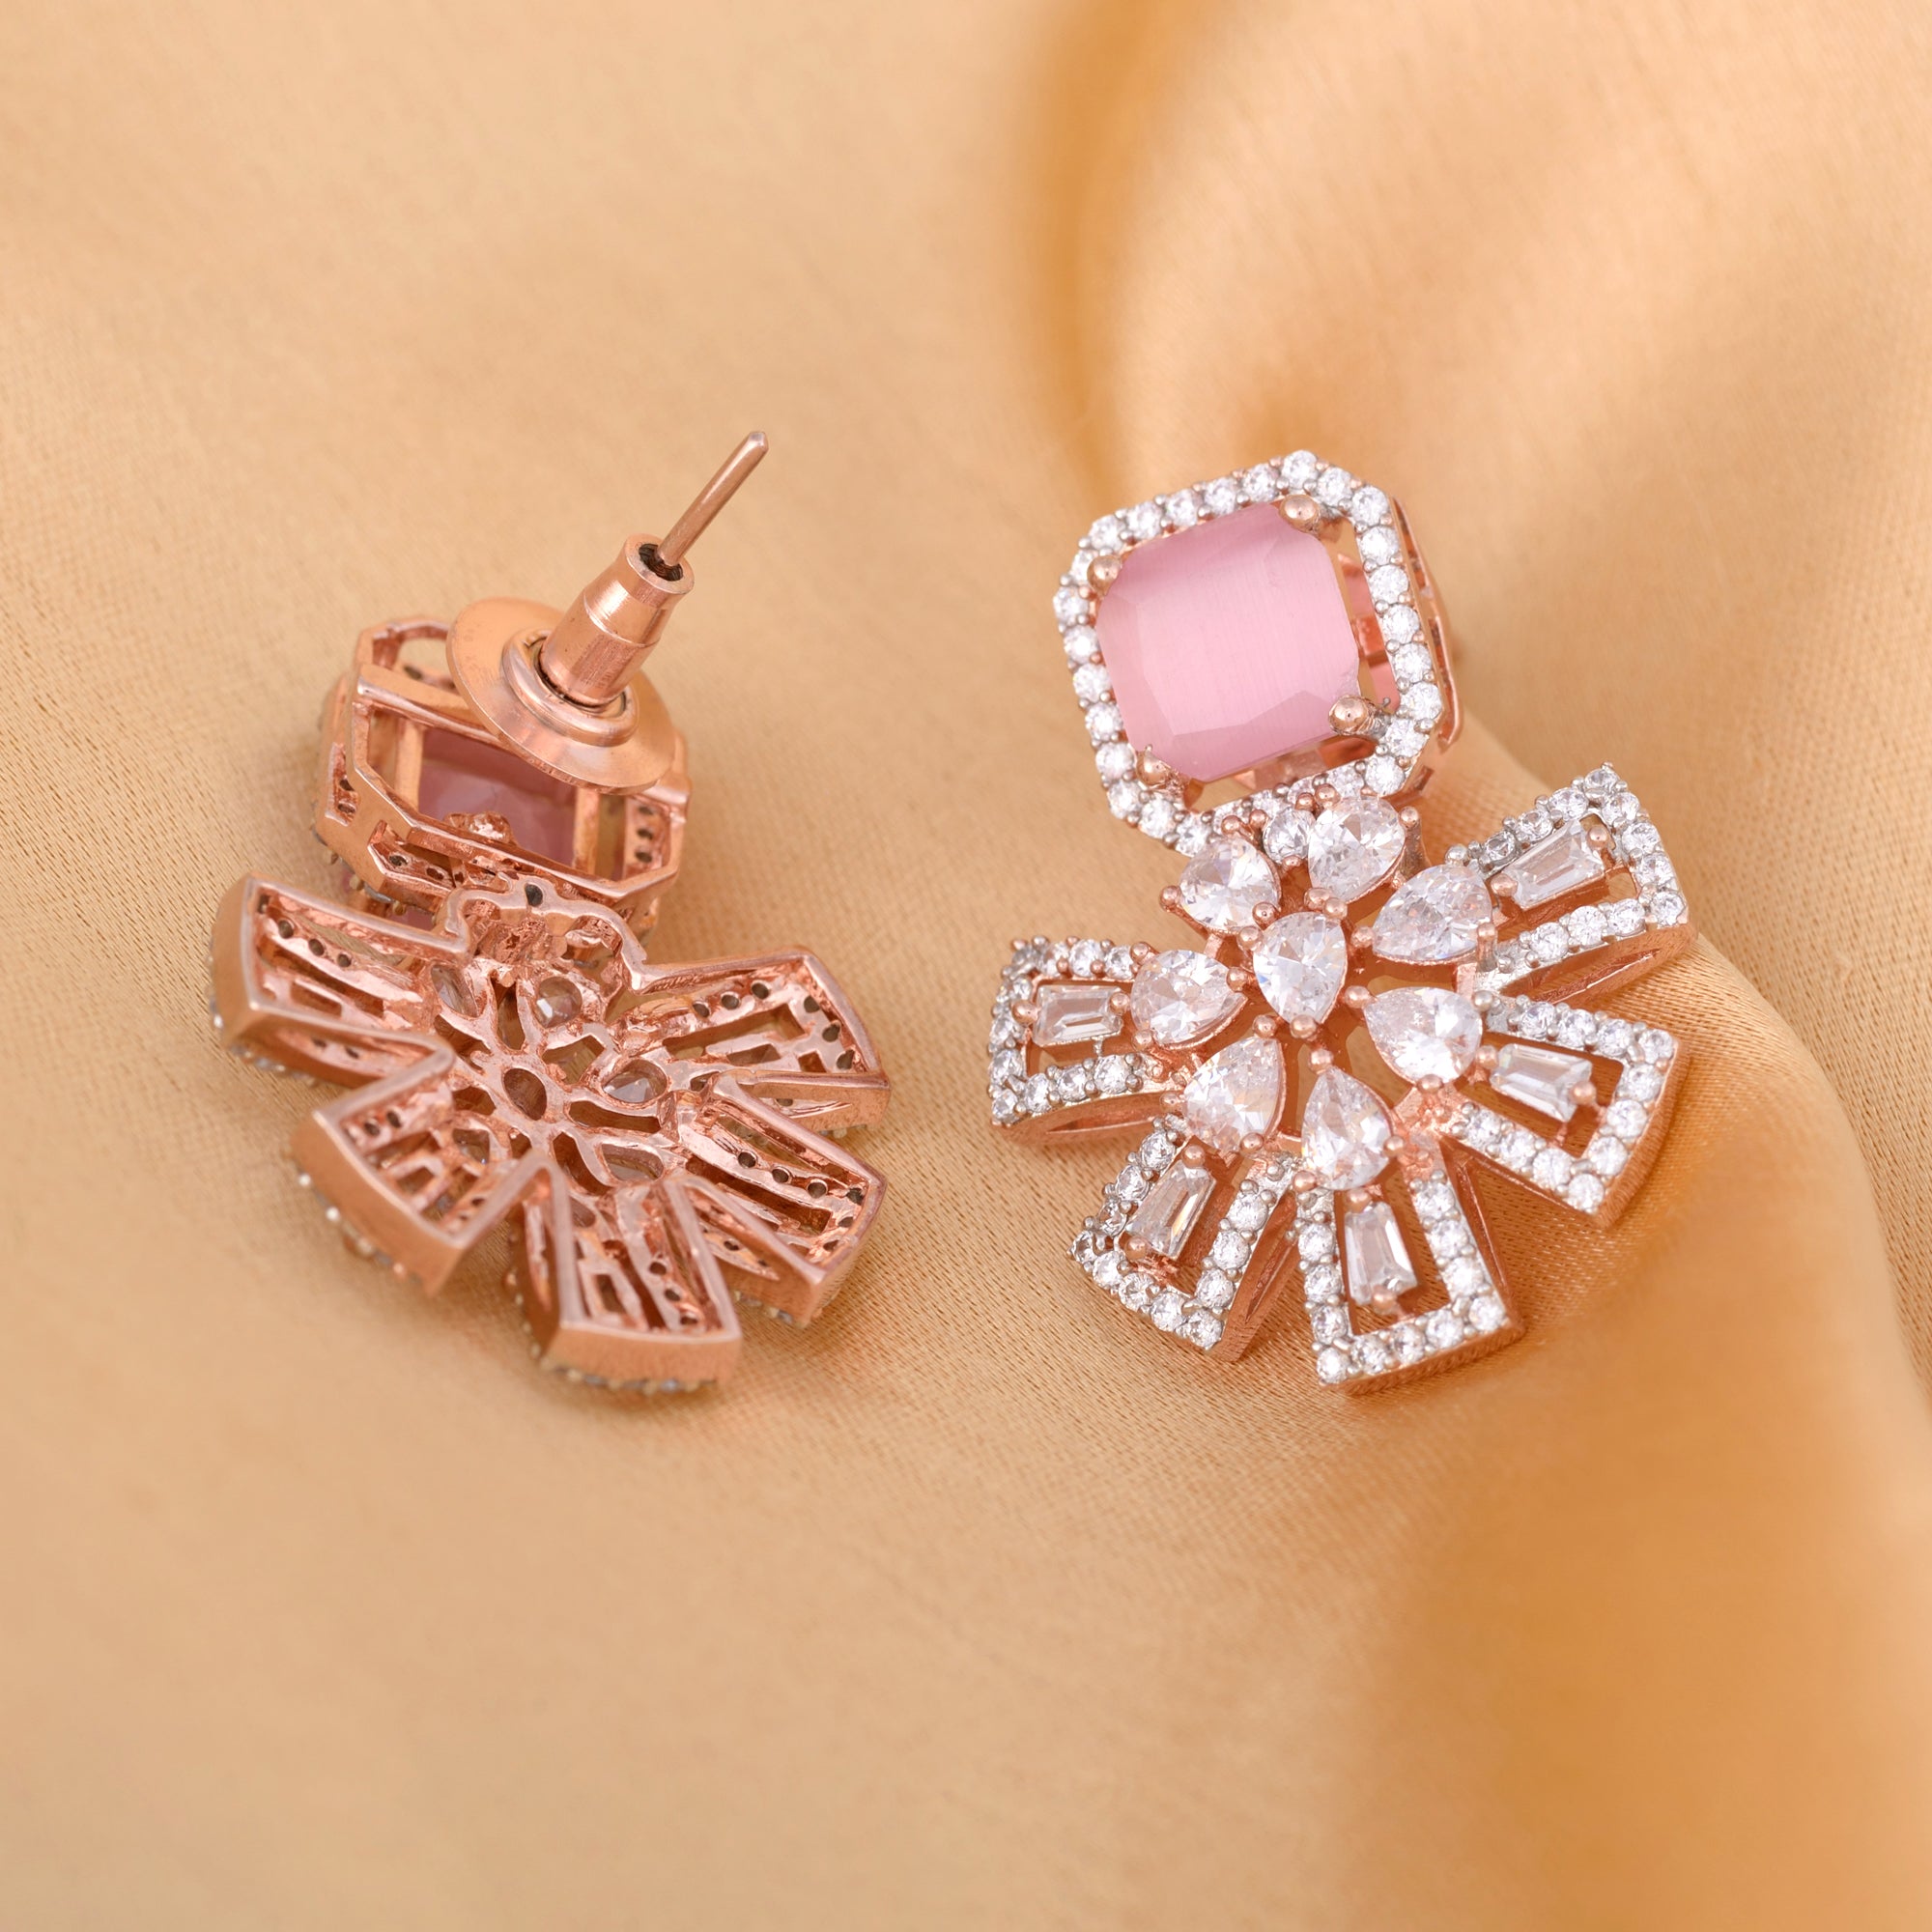 Exquisite Rose Quartz Floral Design Pink Earrings Rose Gold Plated American Diamond Studded for Women and Girls - Saraf RS Jewellery